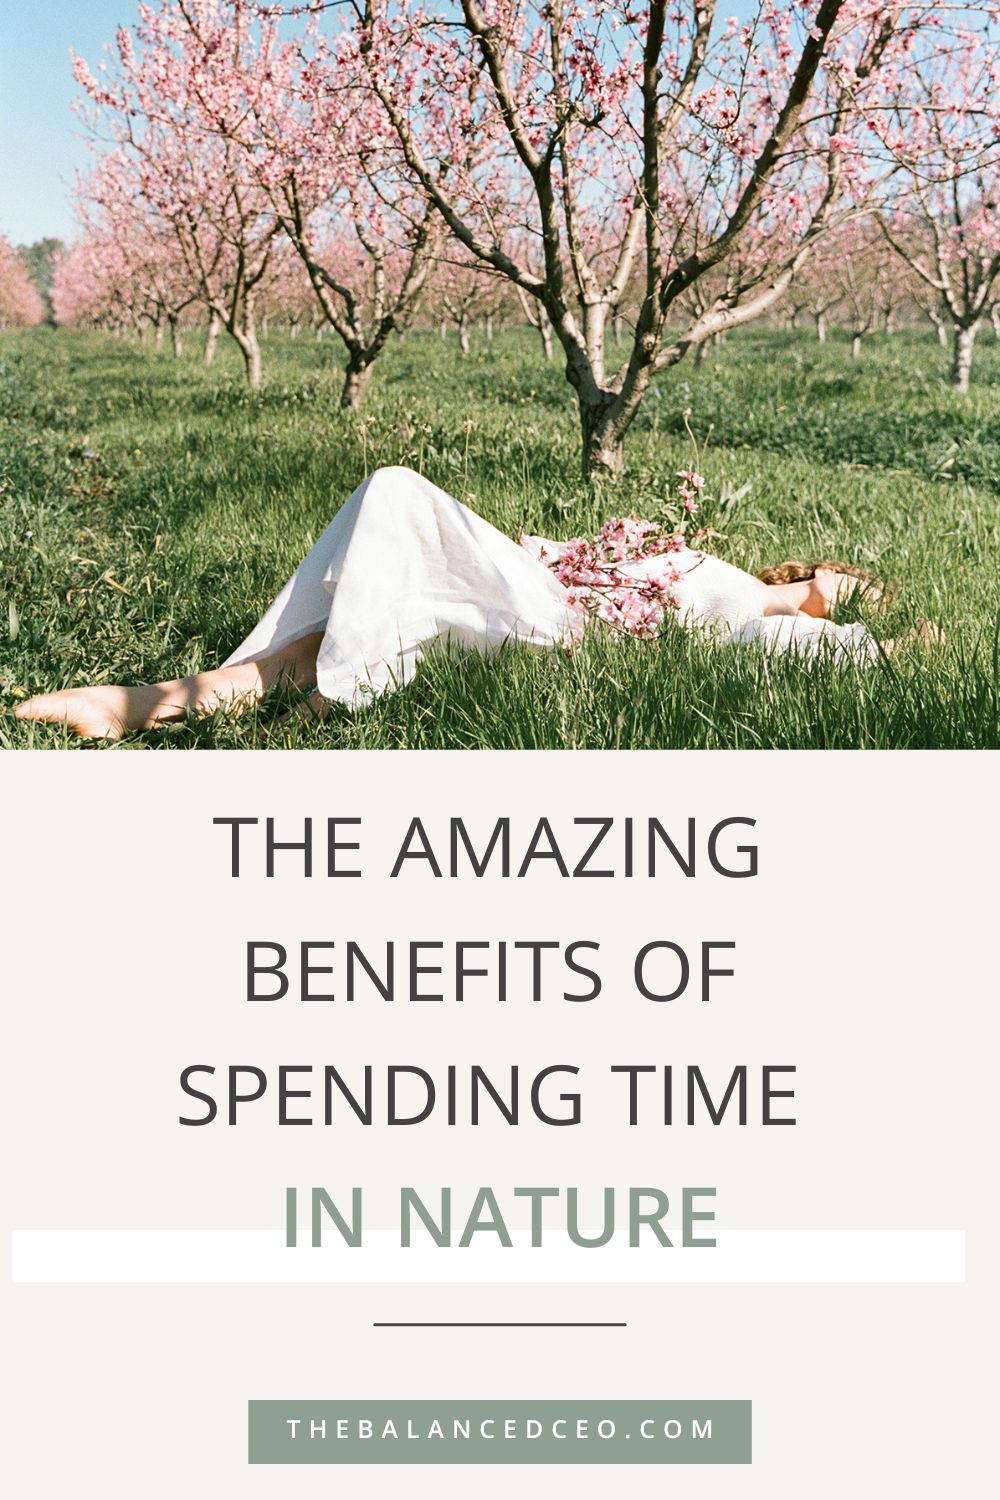 The Amazing Benefits of Spending Time in Nature